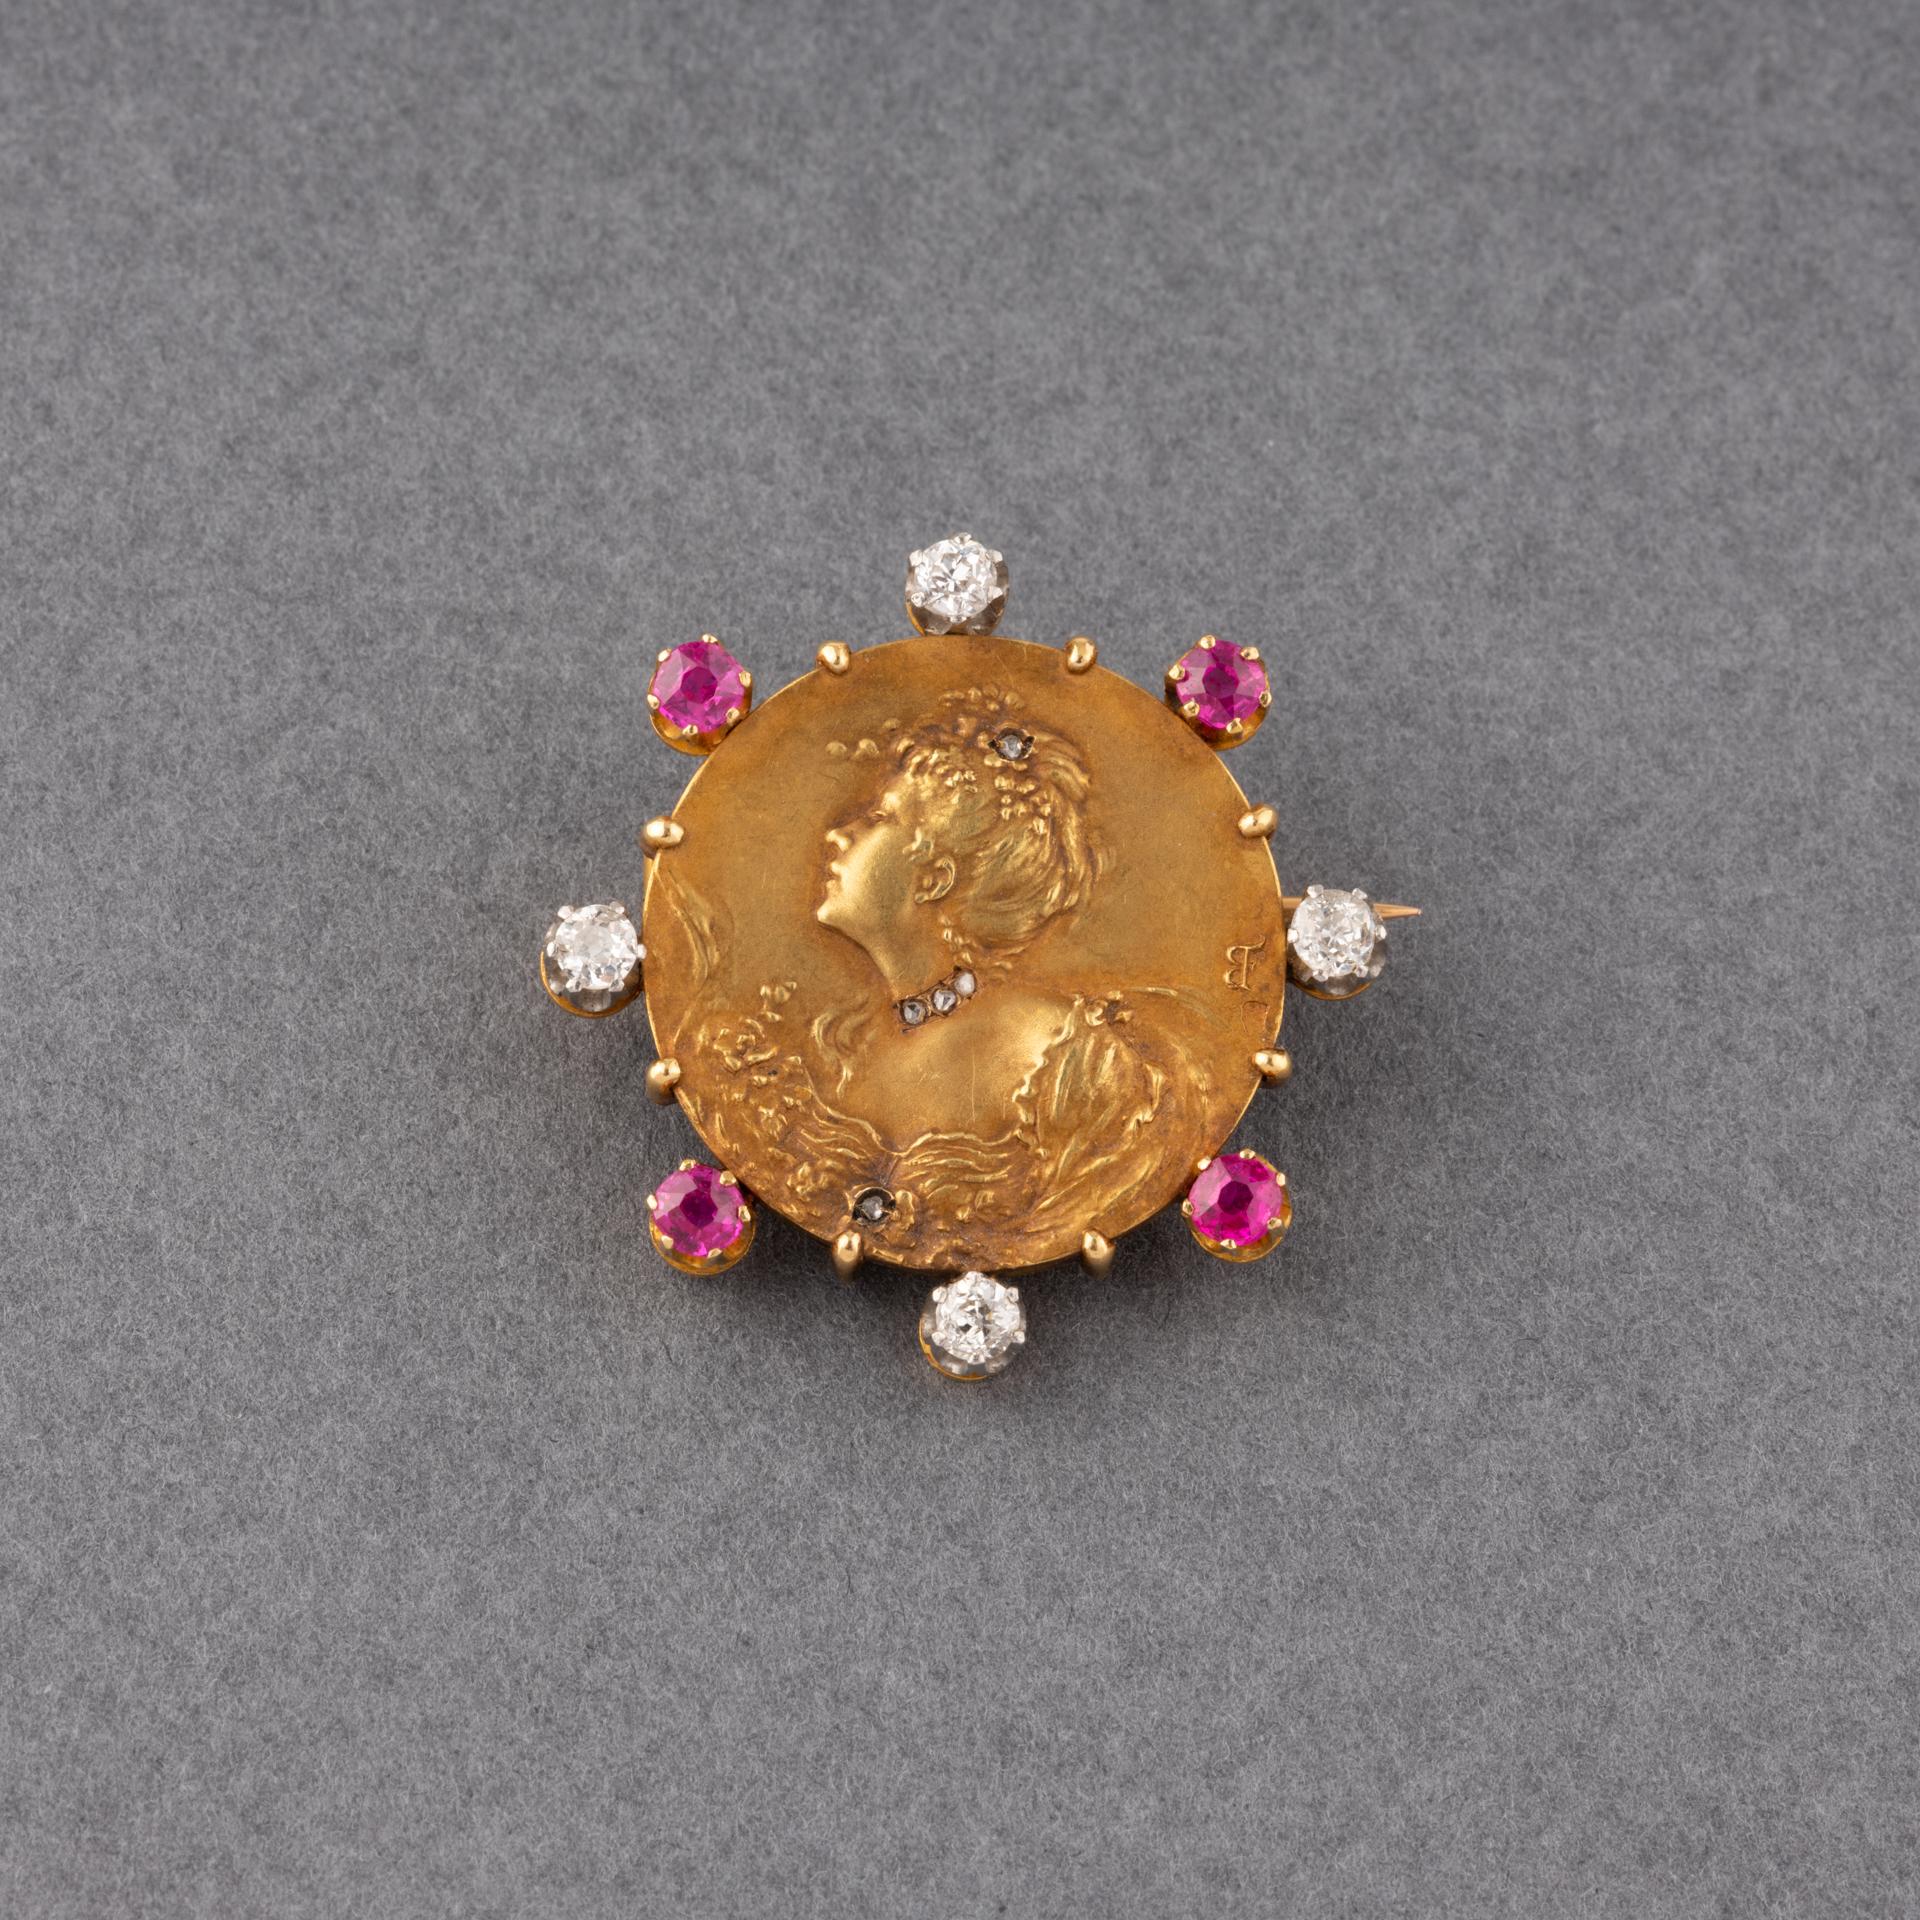 A lovely French Antique brooch, representing a Milady. 
Made in France circa 1900, Belle Epoque era. Made in yellow gold 18k (Mercure Hallmark, it was for jewels made for export).
Set with 4 Old European cut diamonds and Rubies.
Each diamond weights